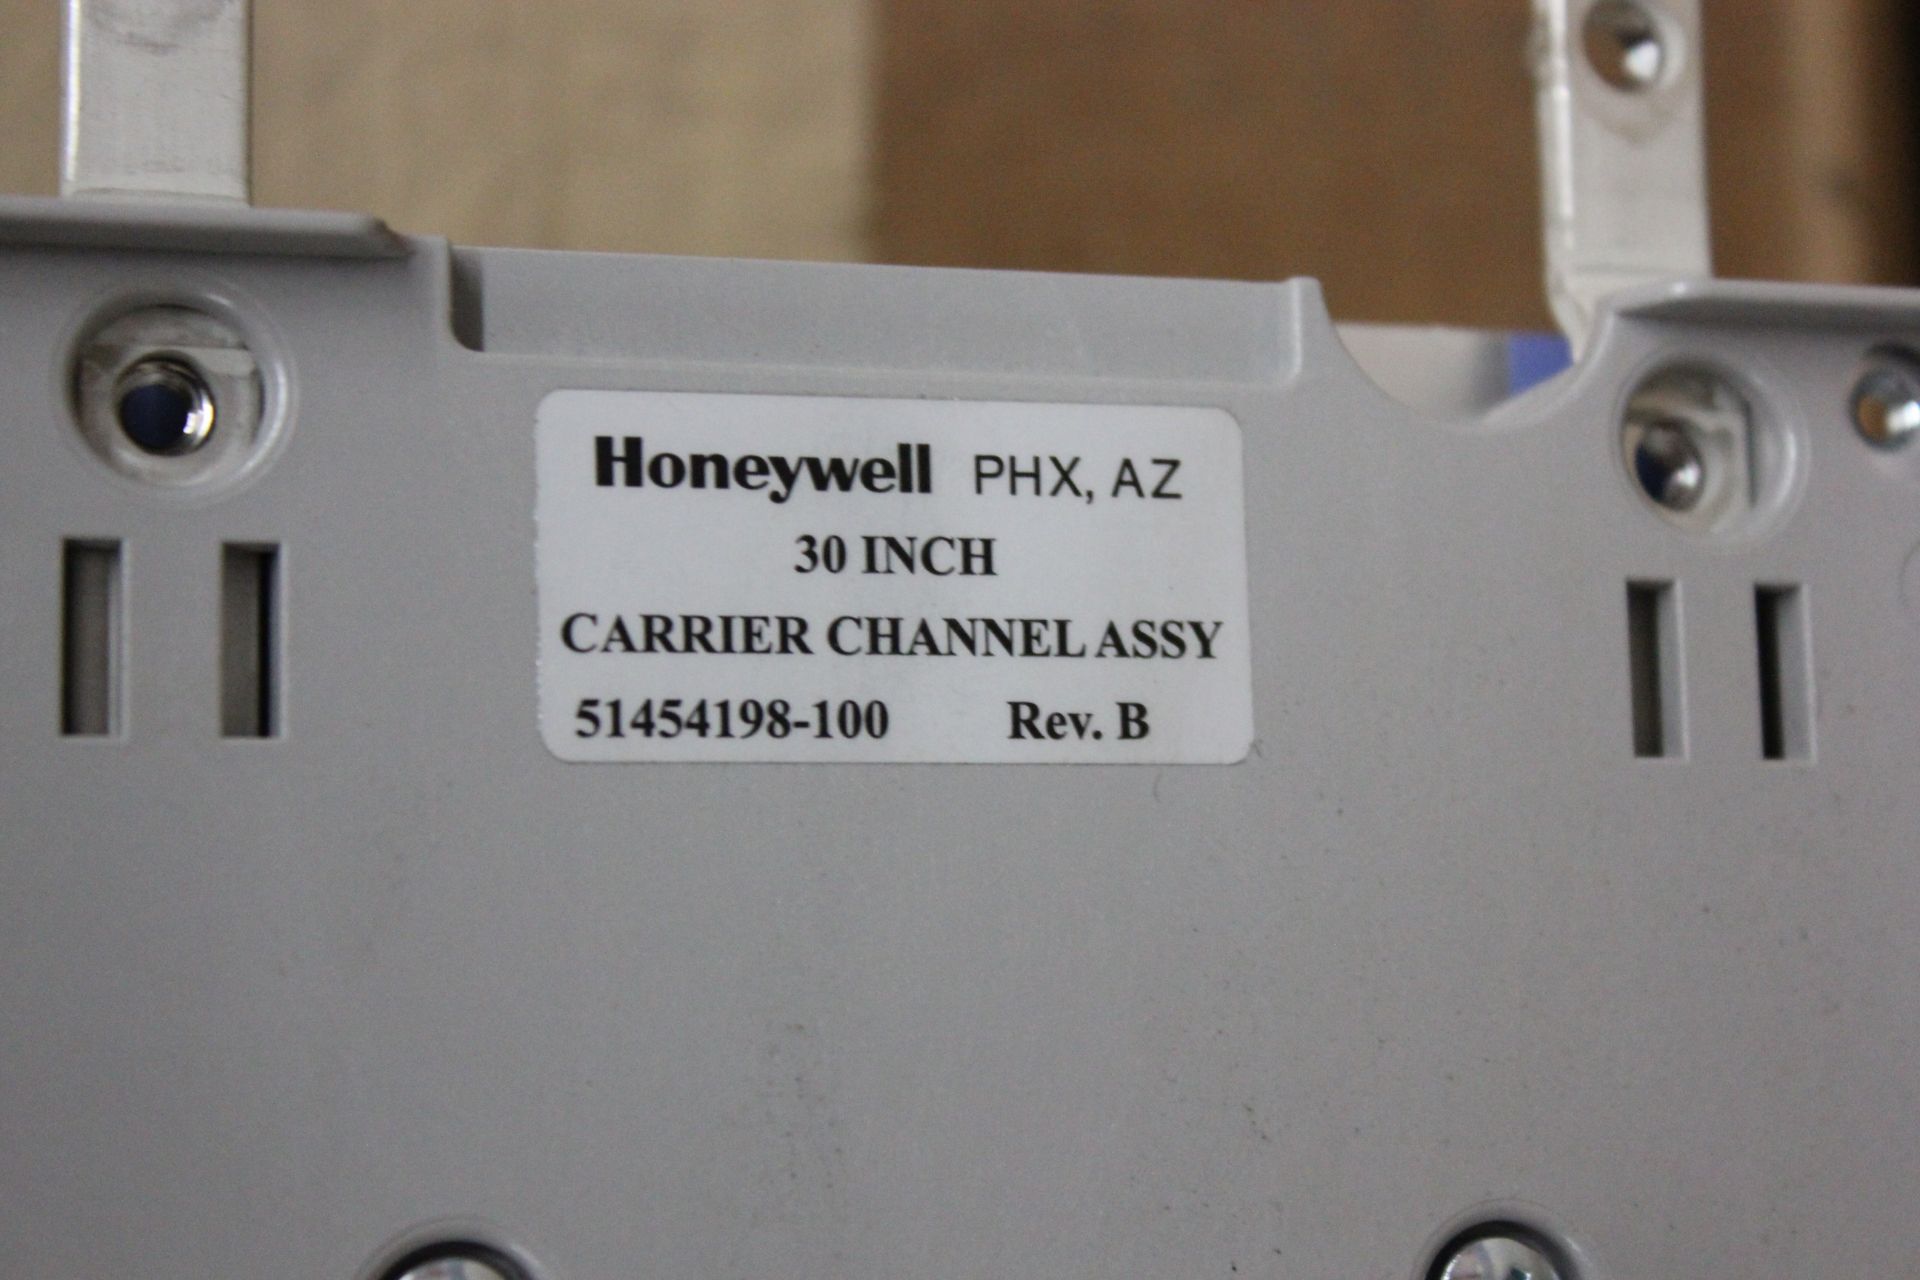 NEW HONEYWELL 30" CARRIER CHANNEL ASSY - Image 4 of 6